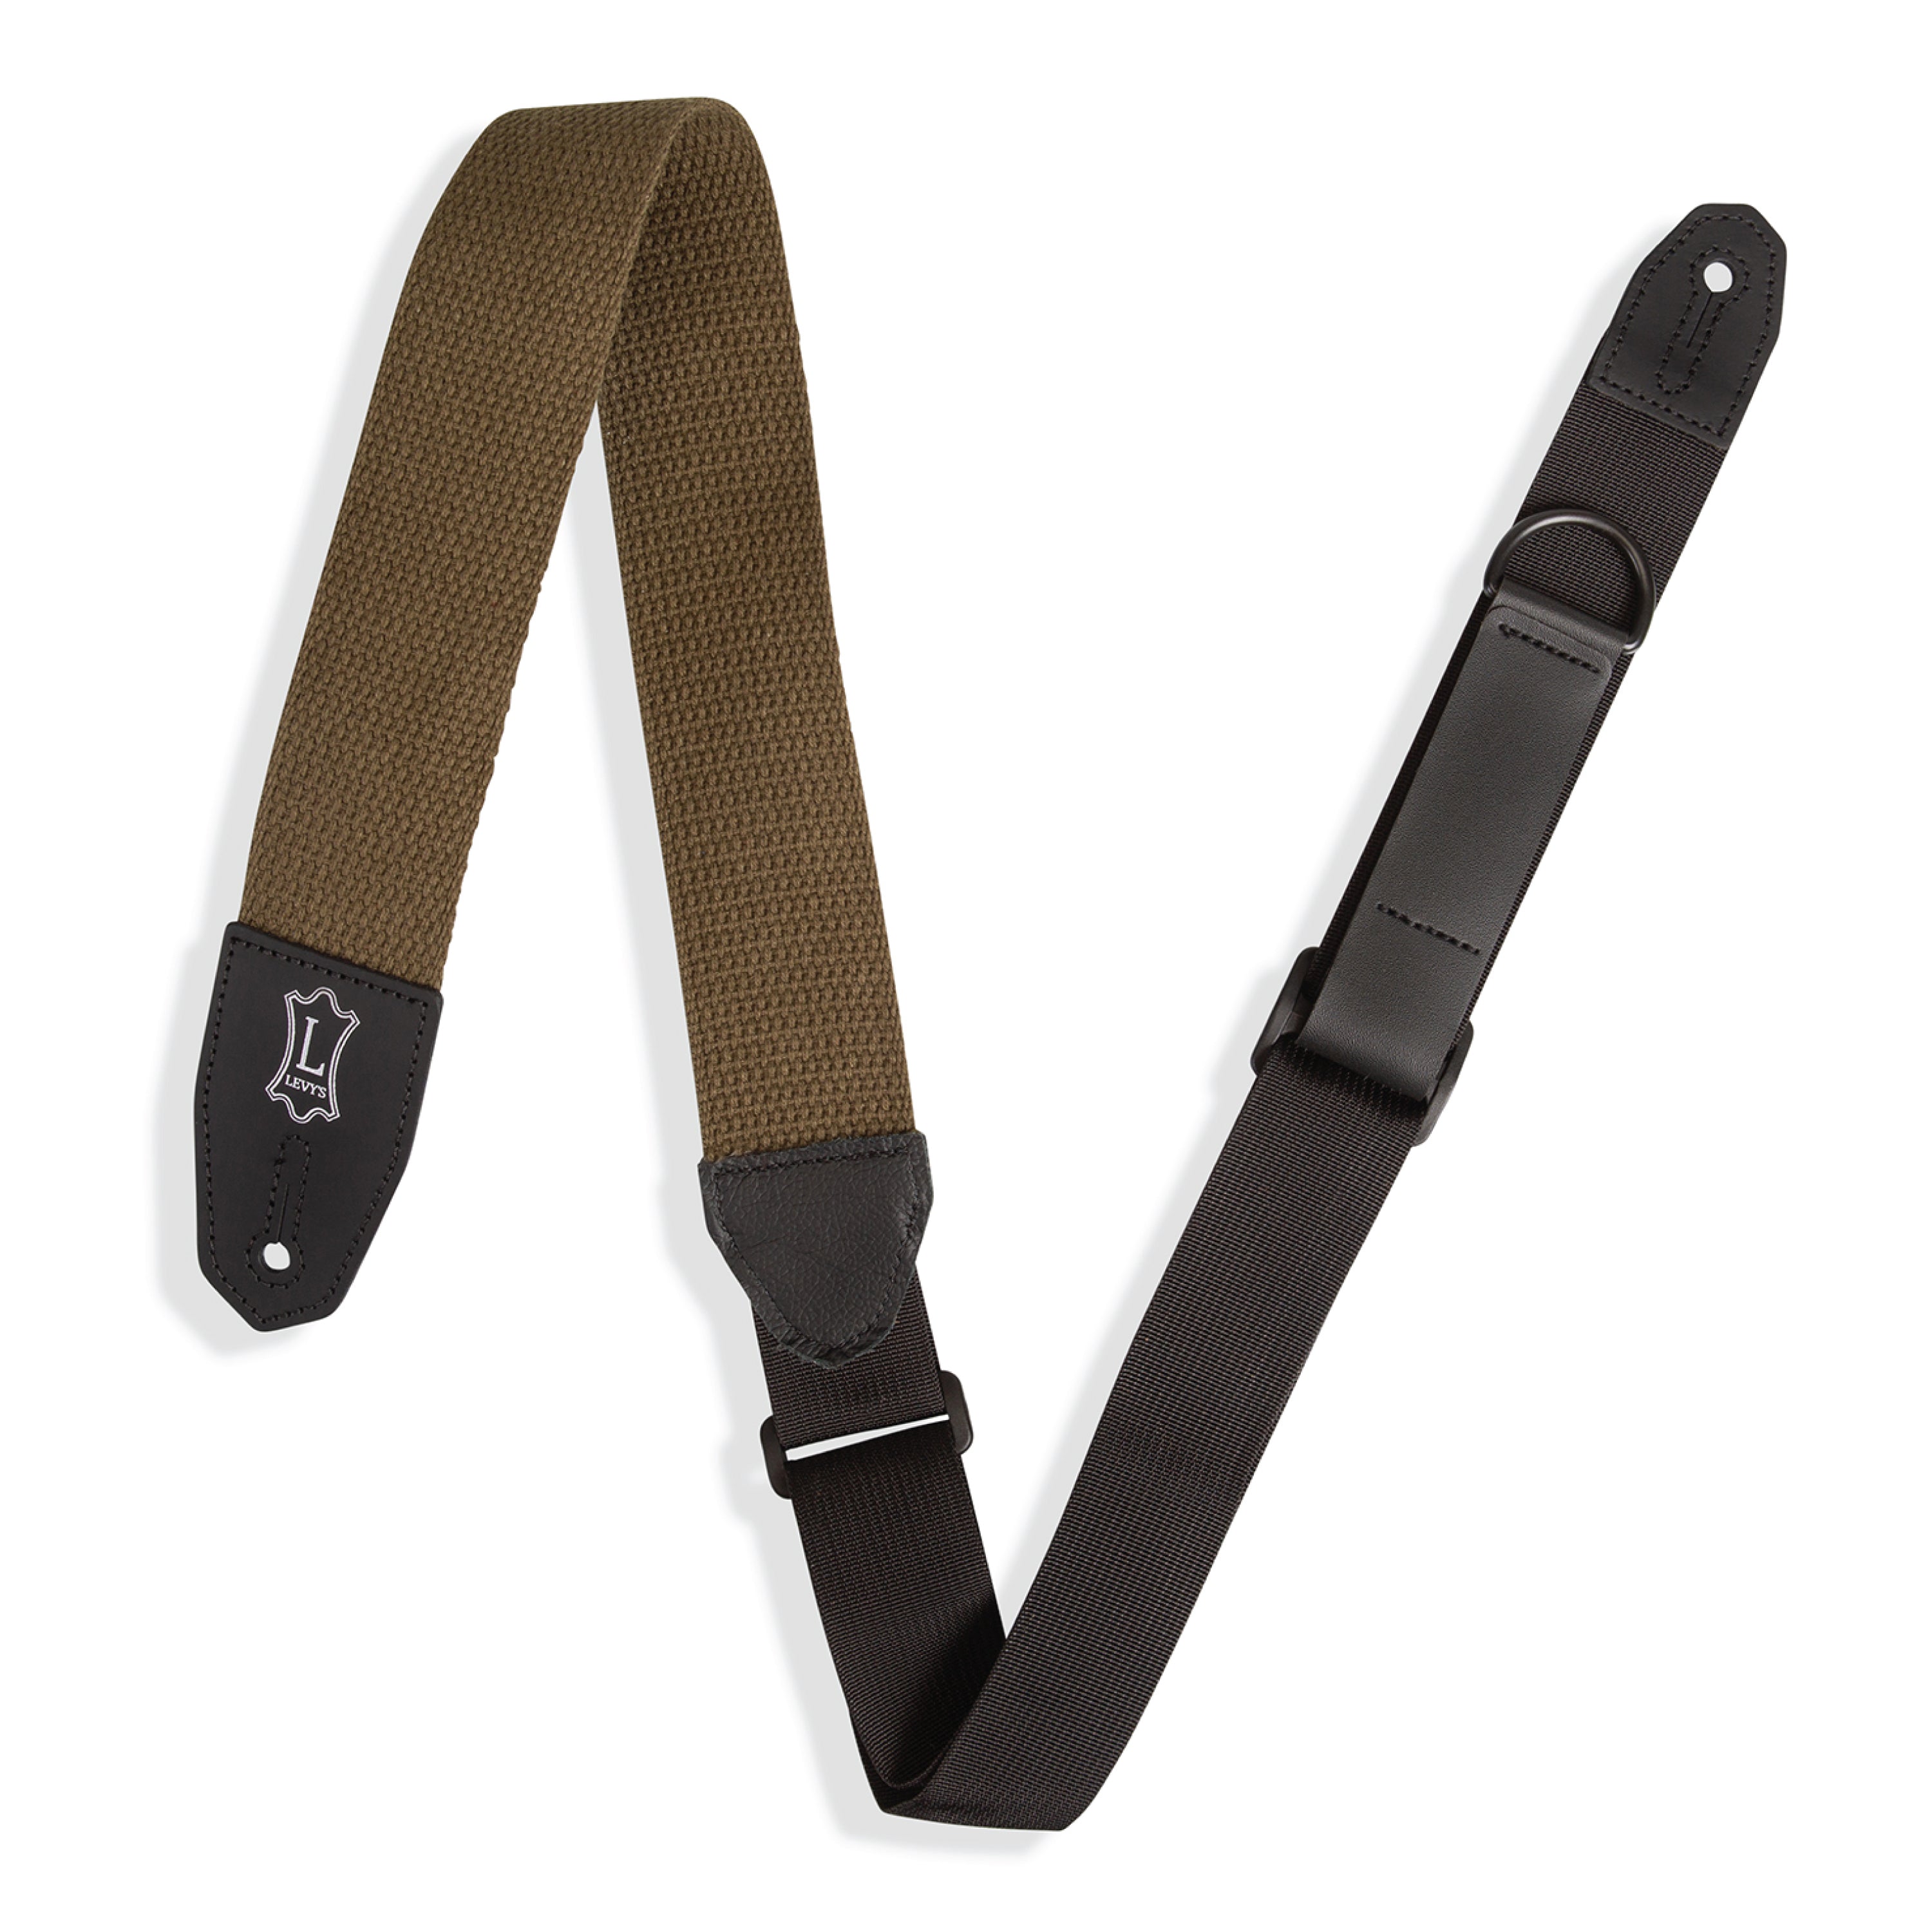 Levy's MRHC Right Height Standard Cotton Guitar Strap